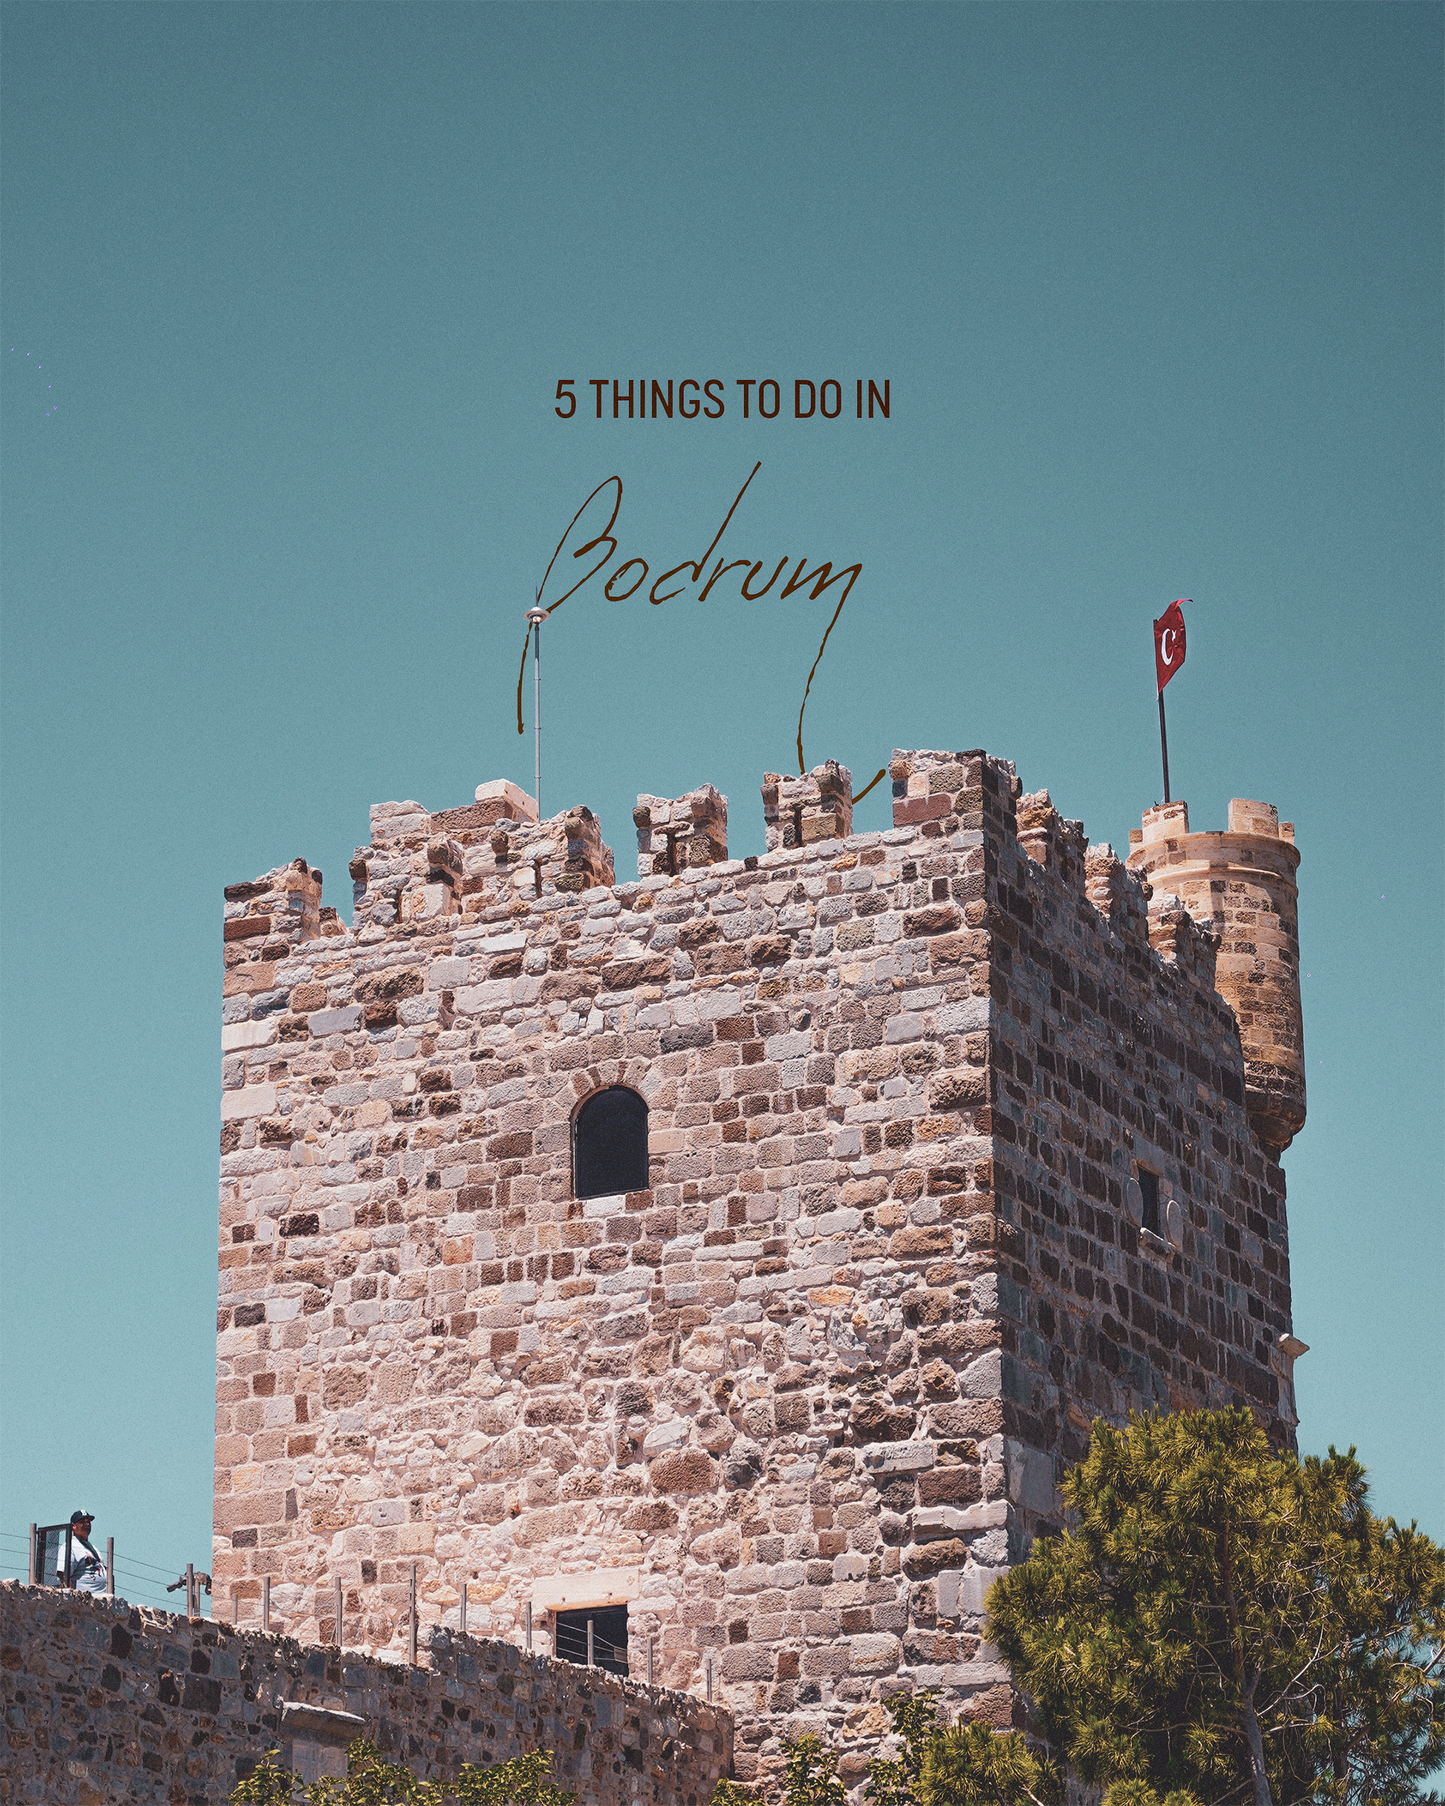 5 THINGS TO DO IN BODRUM